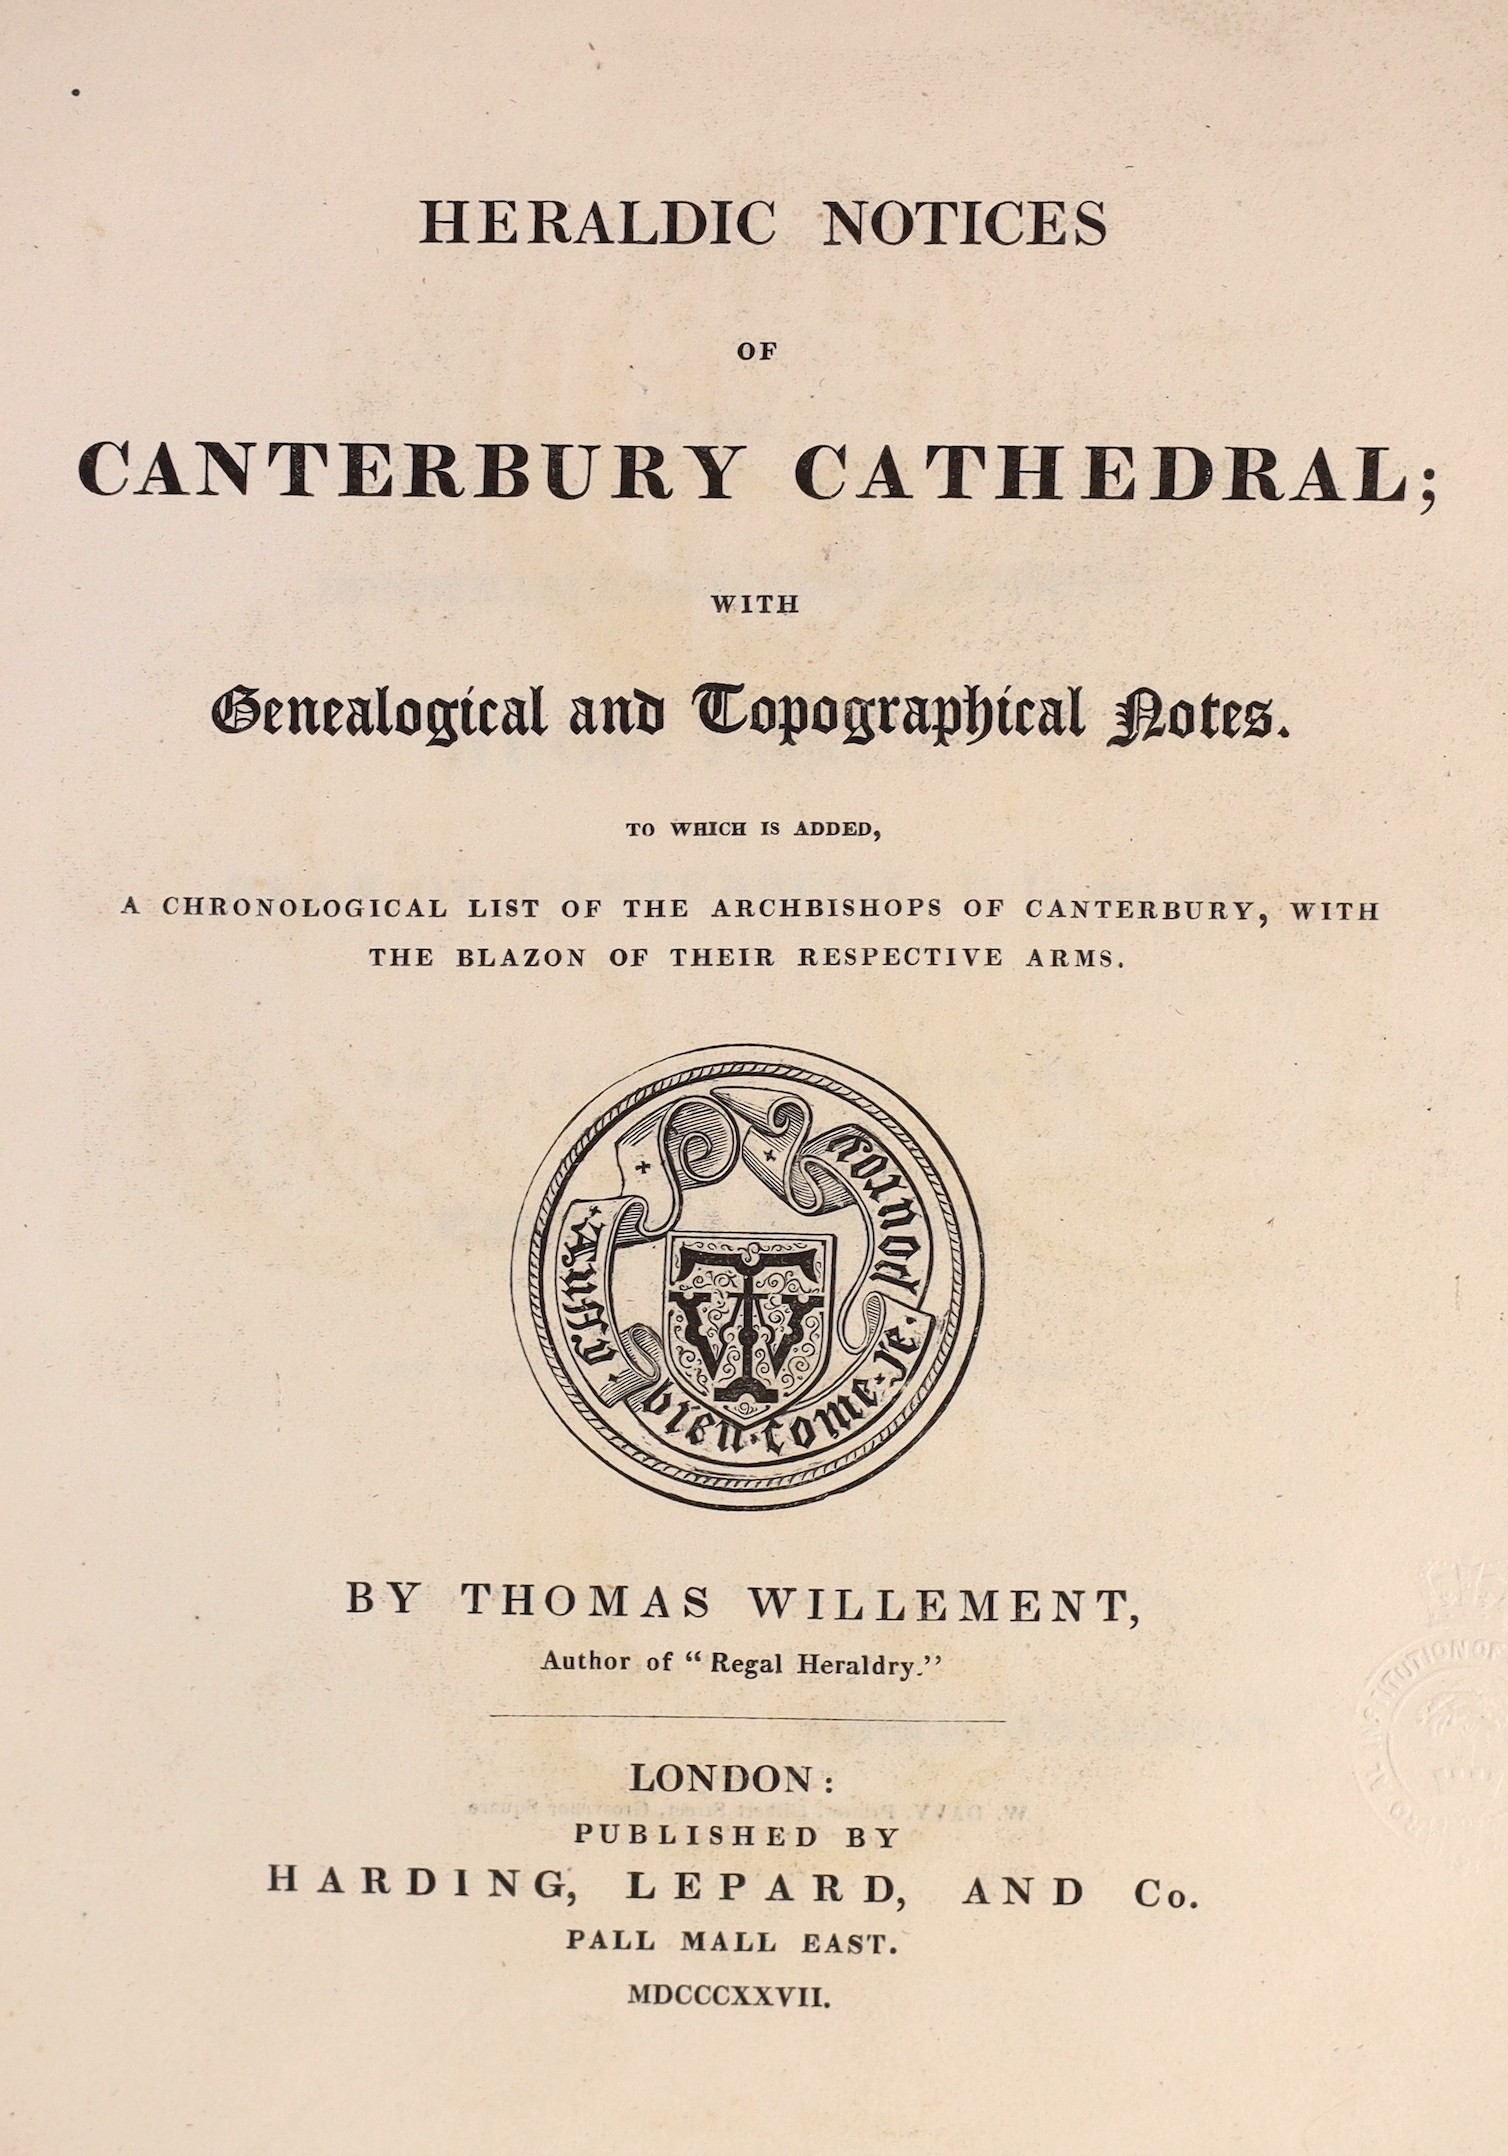 CANTERBURY: Willement, Thomas - Heraldic Notes of Canterbury Cathedral, with genealogical and topographical notes .... frontis and engraved text illus., old paper boards, spine replaced and new label, uncut, 4to. 1827   